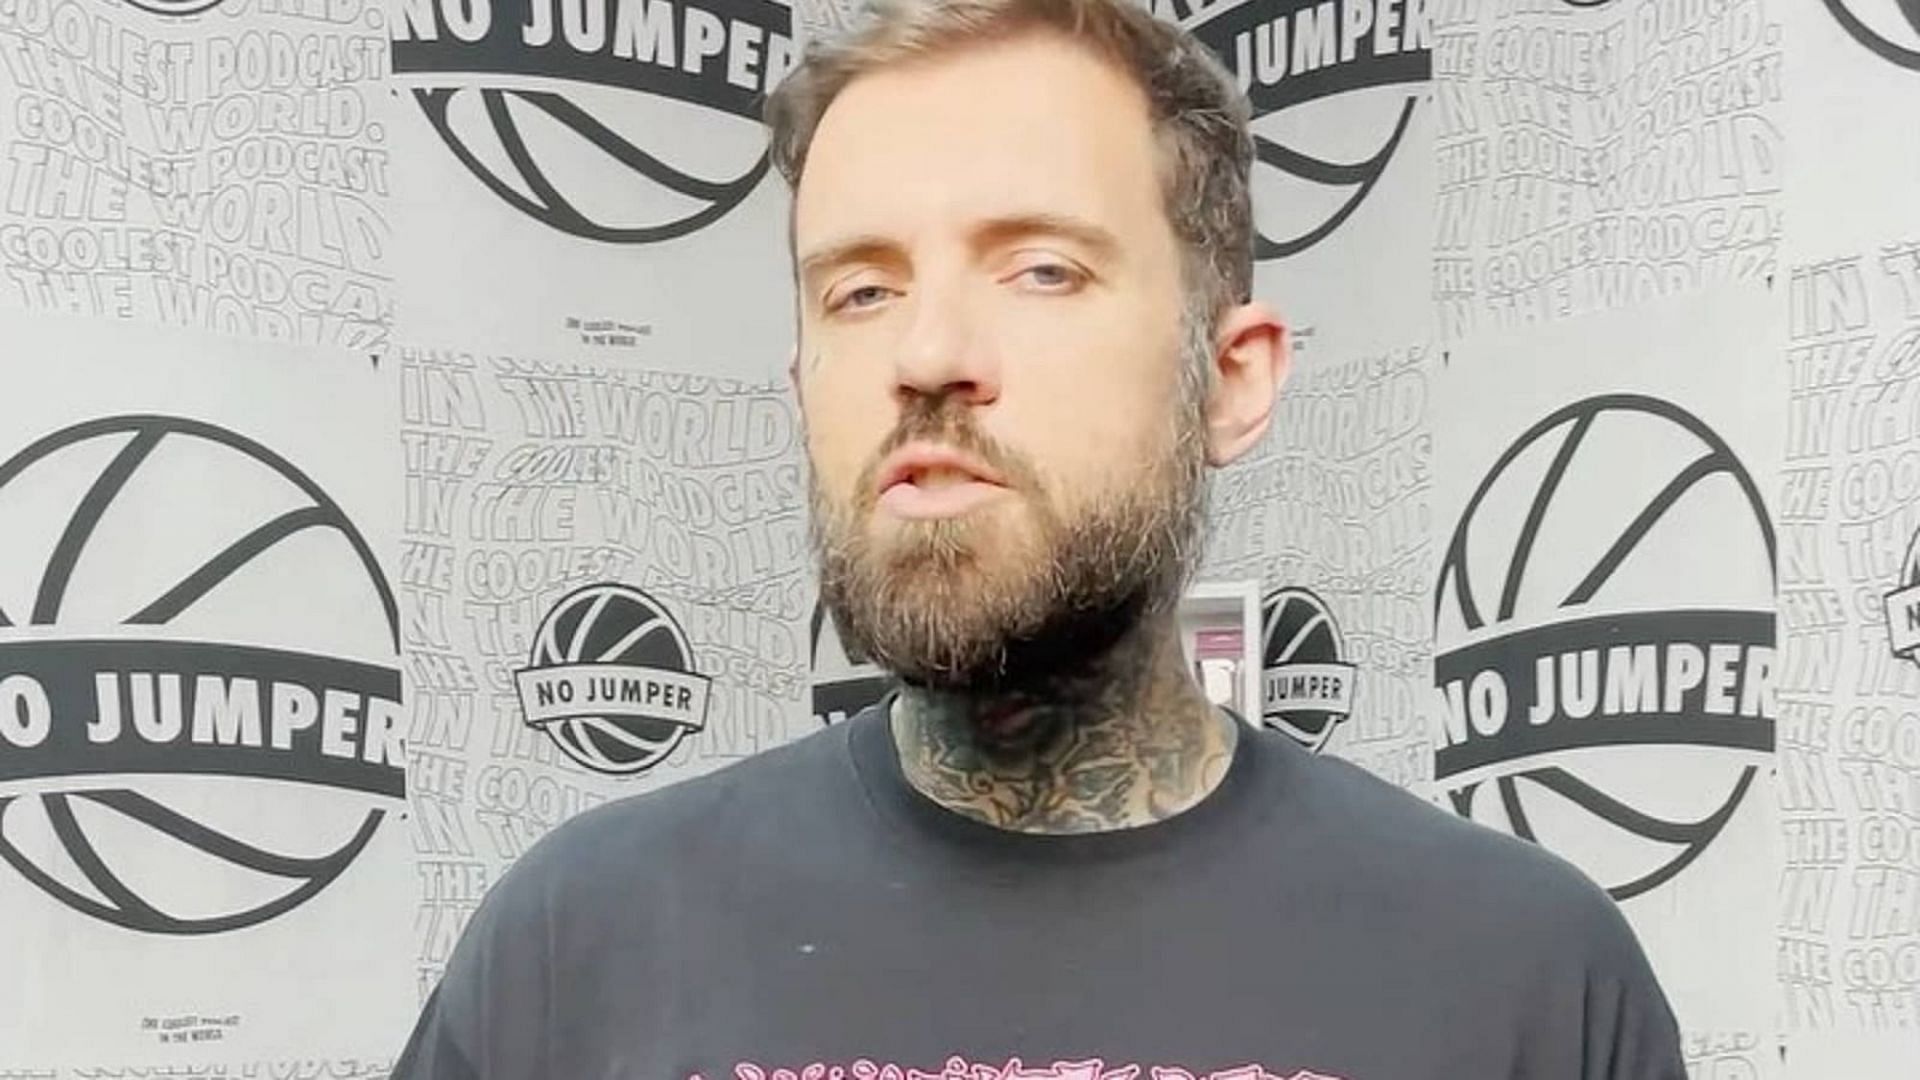 P*dophile accusations against Adam22 come to light in wake of hosts leaving No Jumper (Image via Adam22/Instagram) 